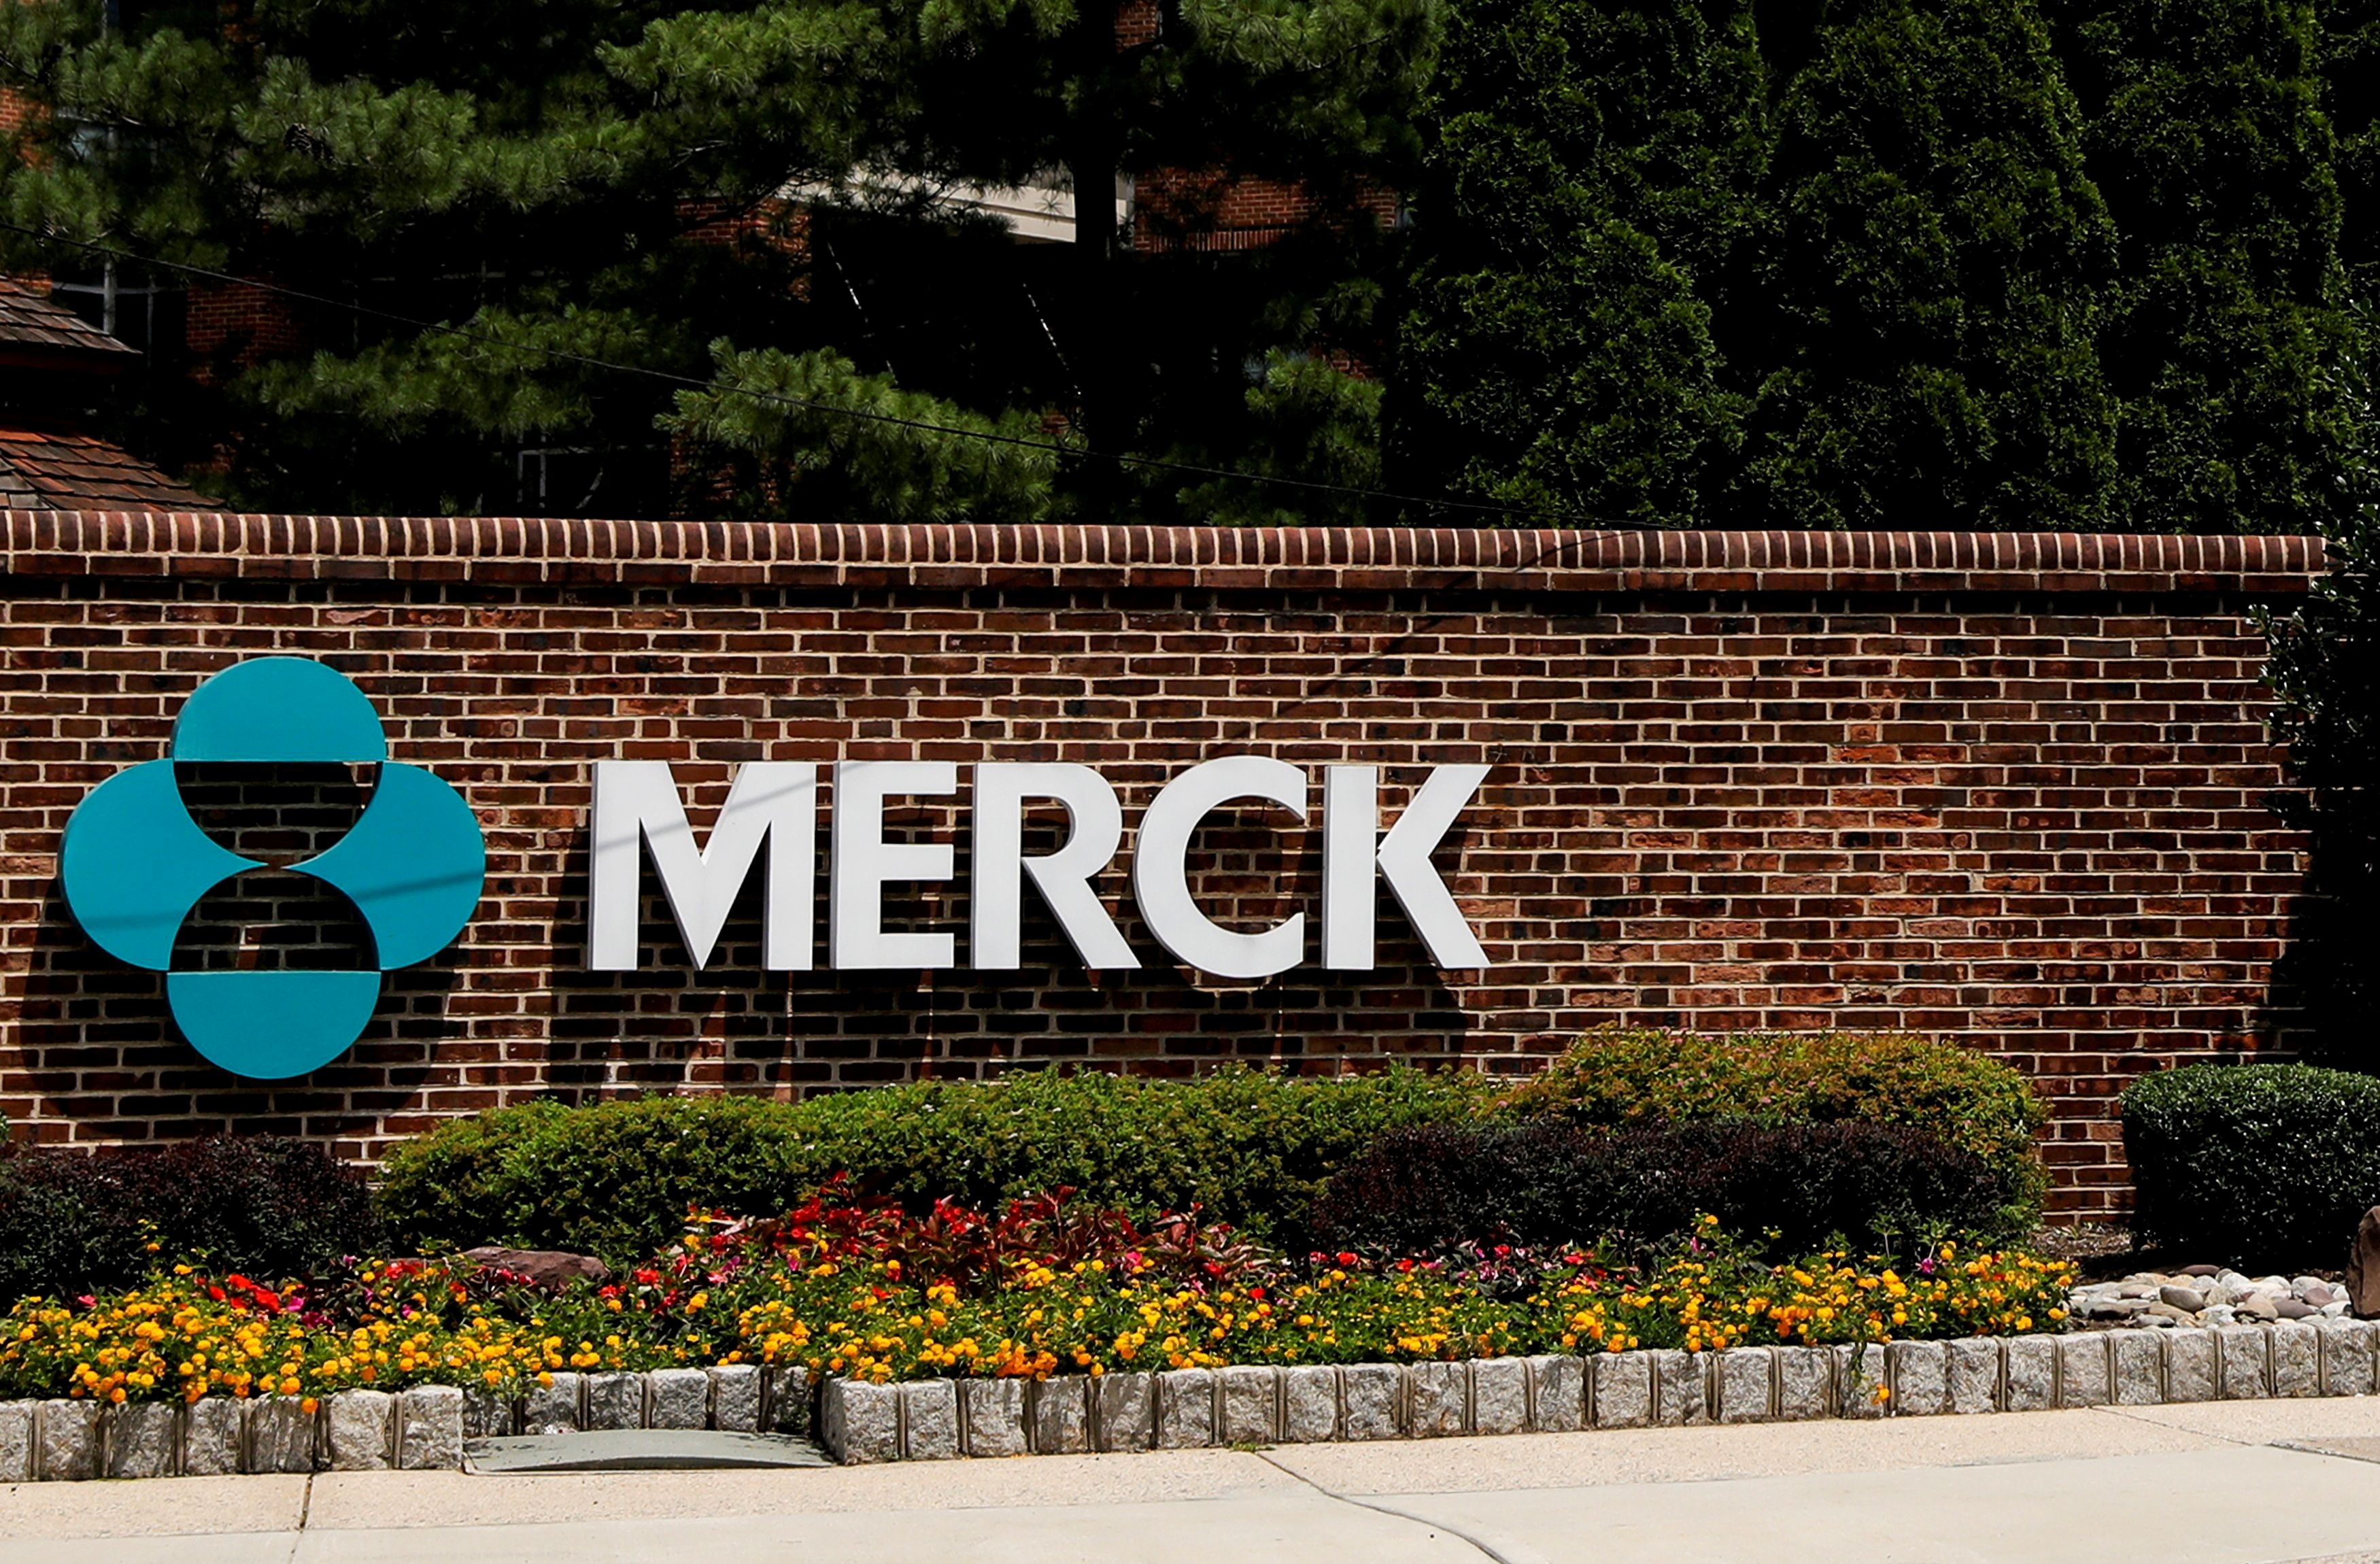 FILE PHOTO: The Merck logo is seen at a gate to the Merck & Co campus in Rahway, New Jersey